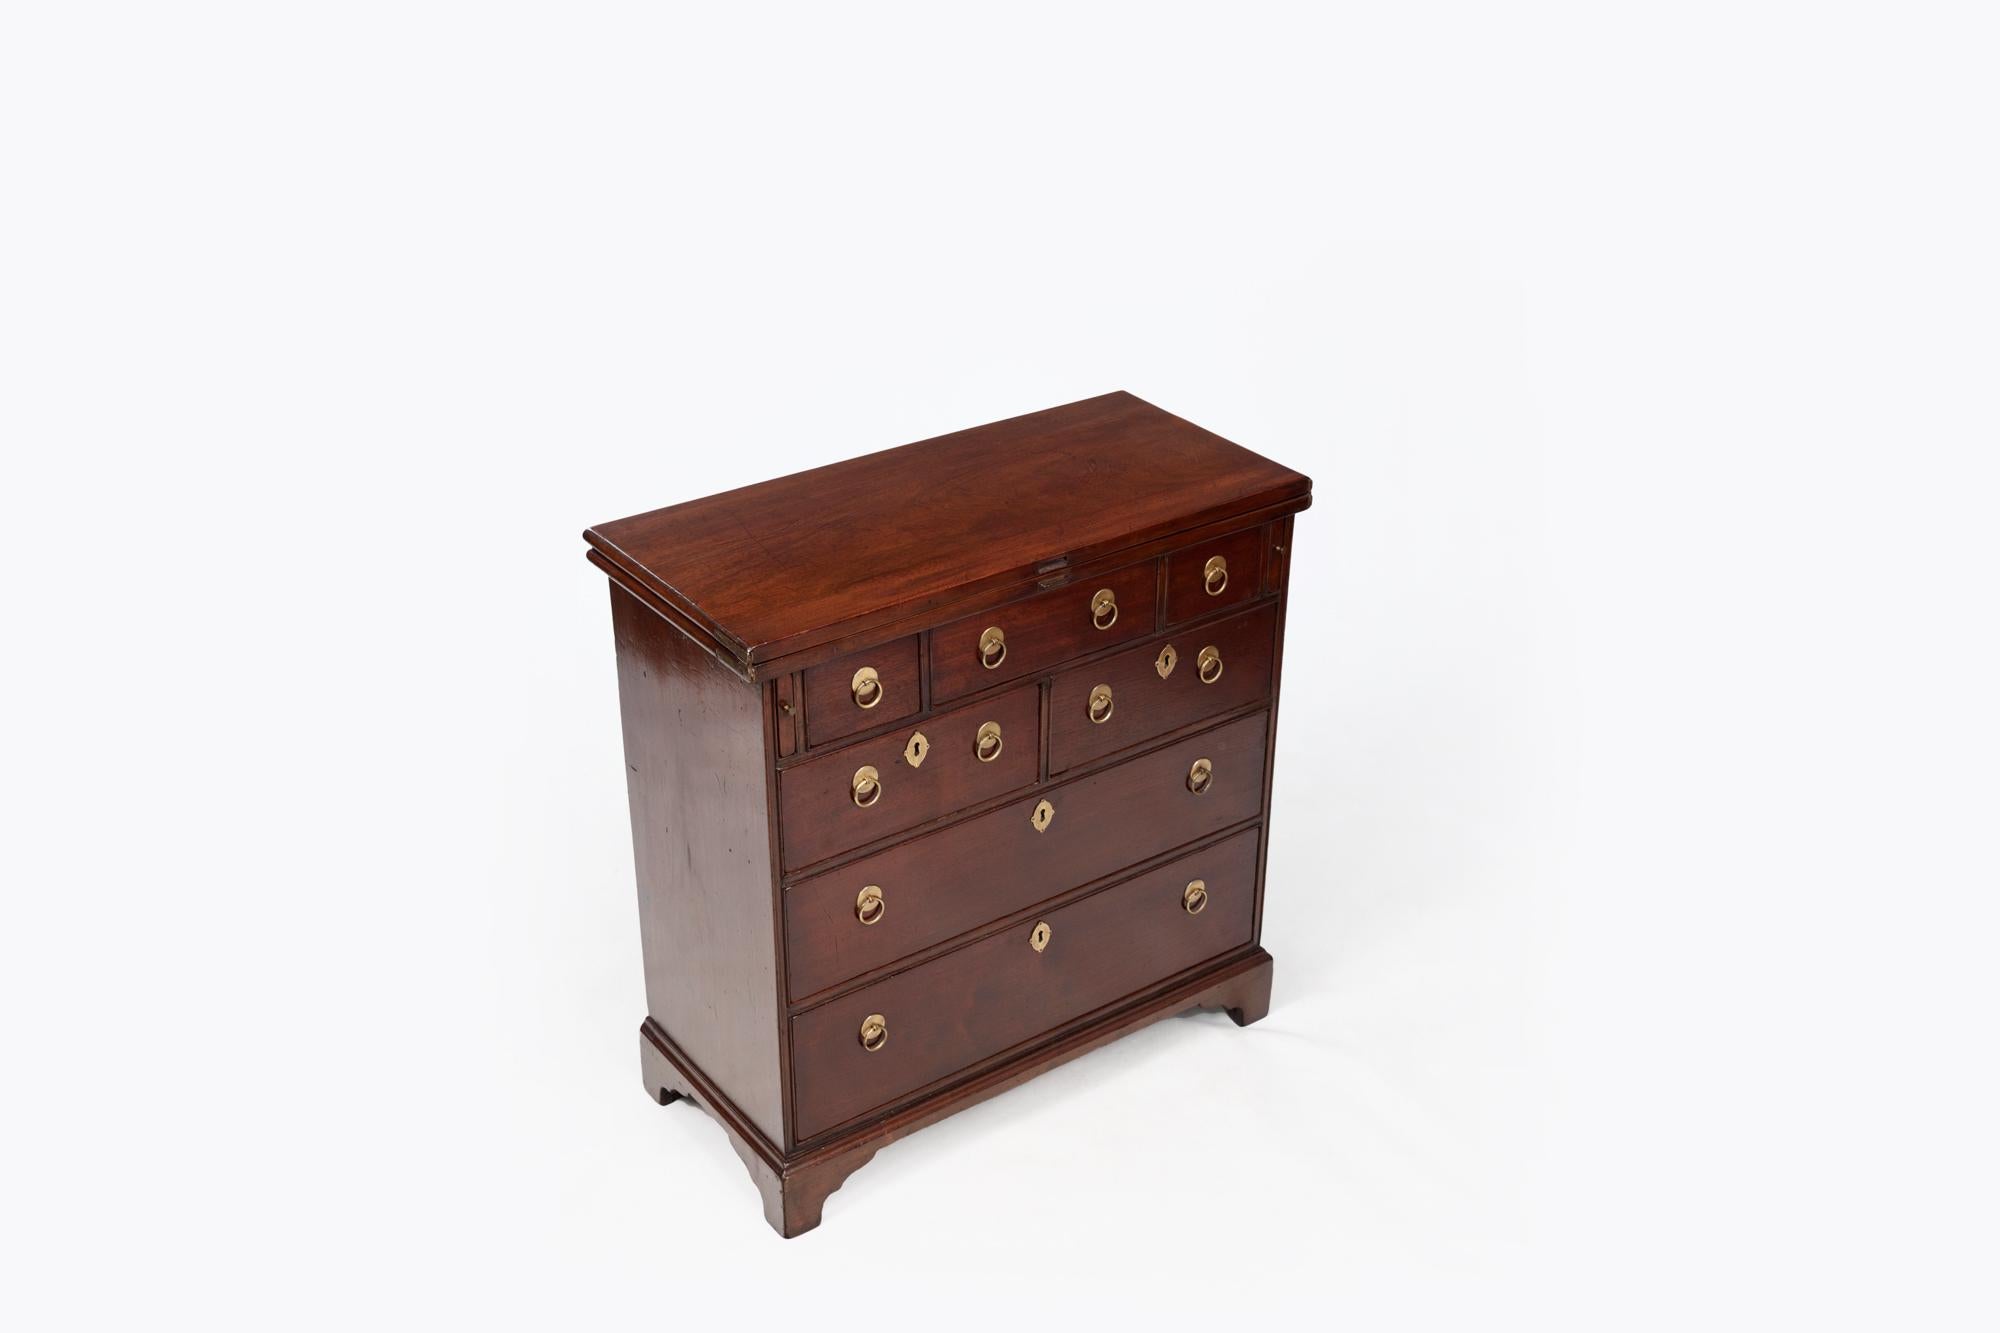 18th Century Georgian Mahogany Bachelor’s Chest In Excellent Condition For Sale In Dublin 8, IE